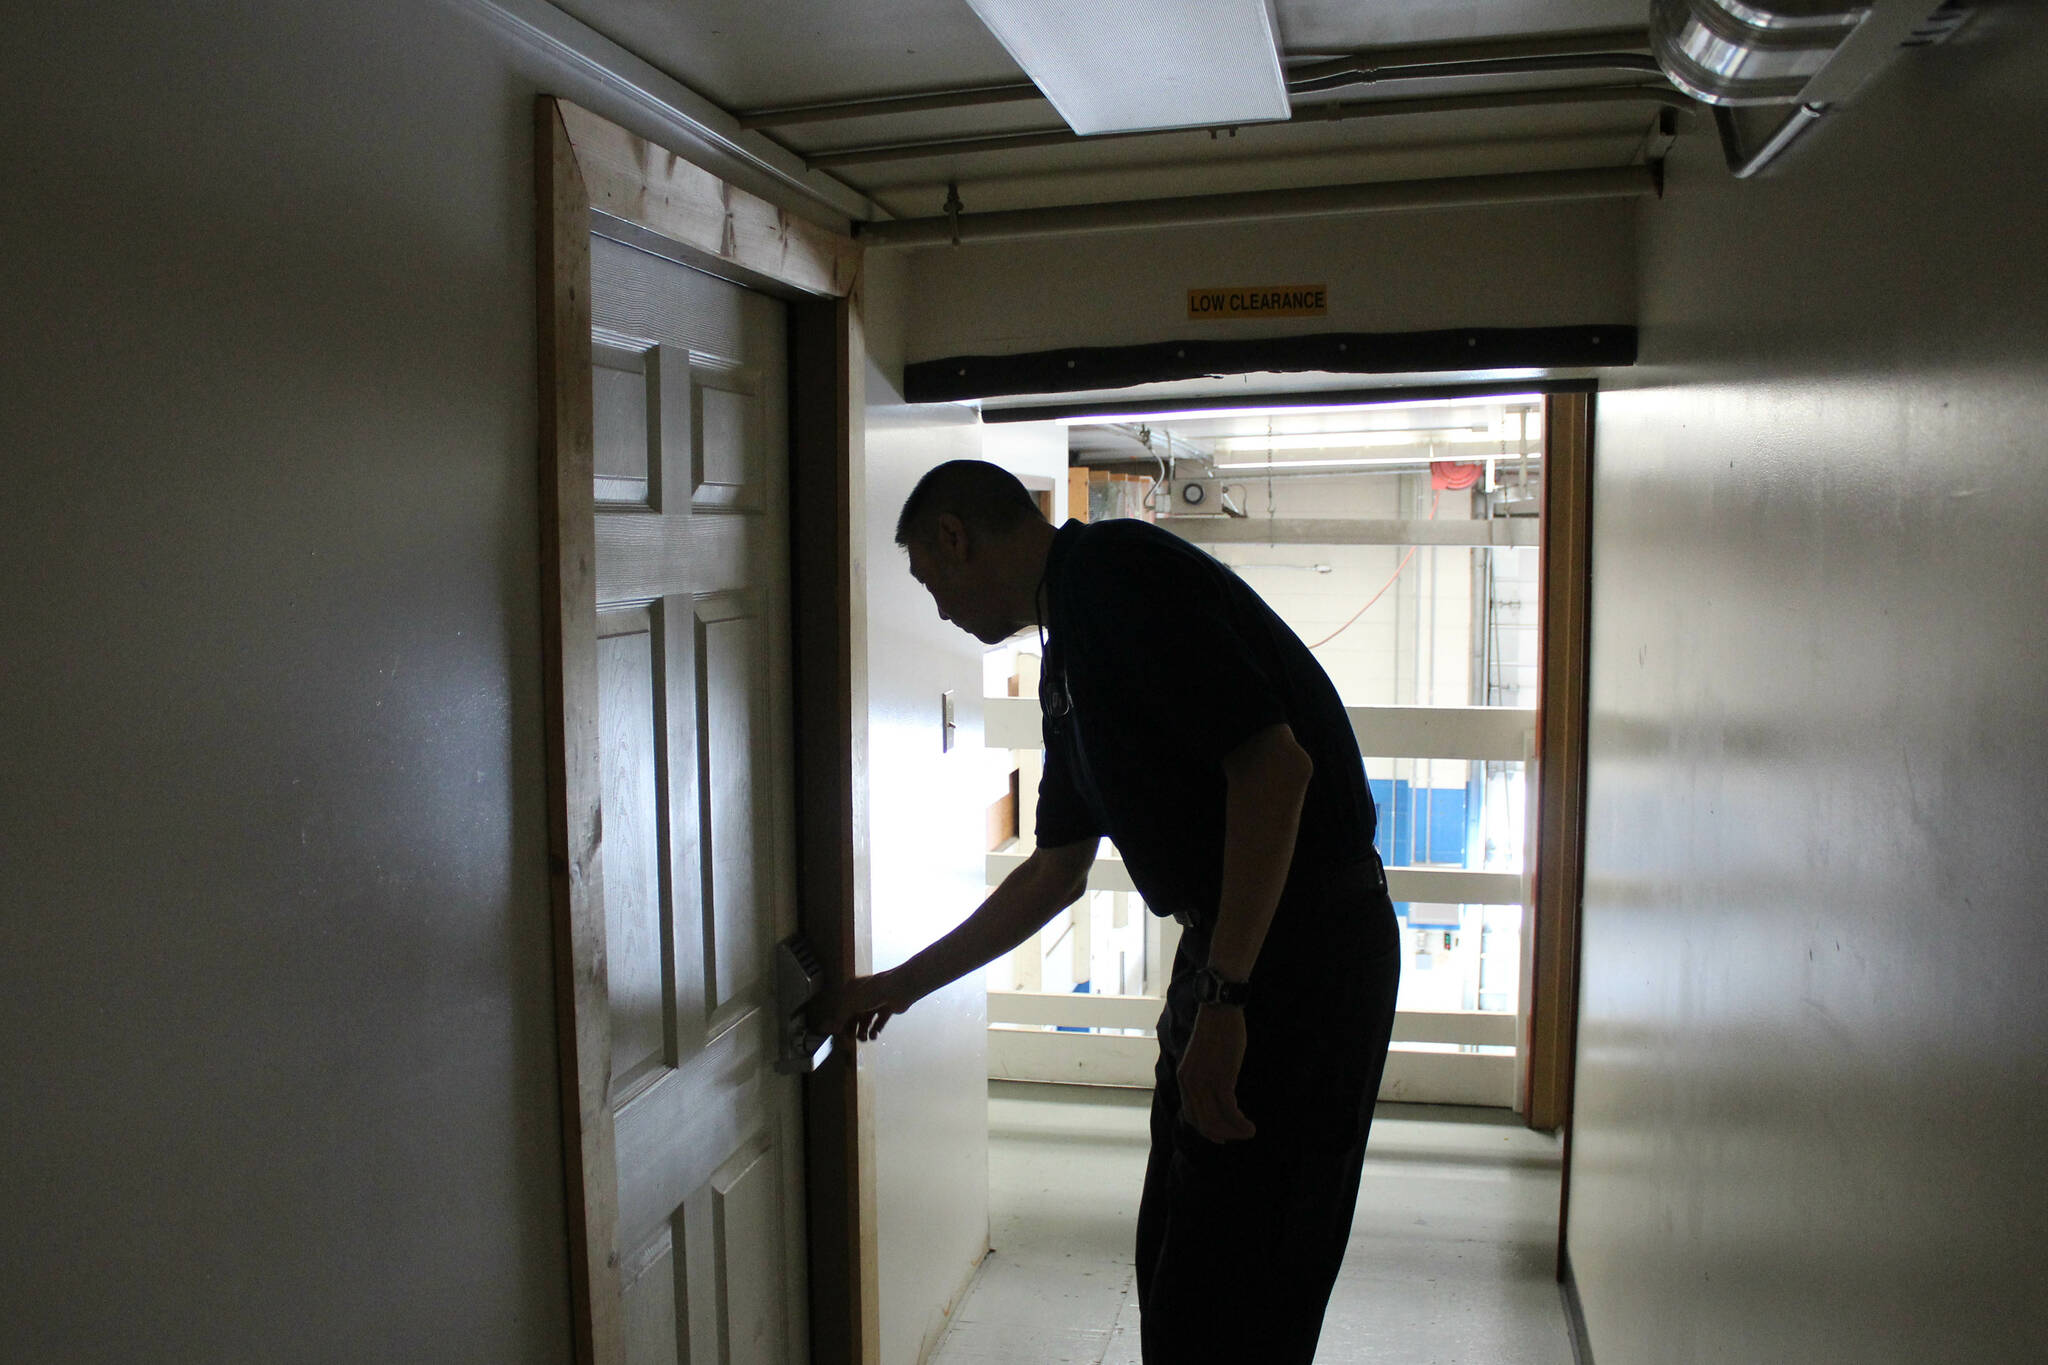 Central Emergency Services Fire Chief Roy Browning stoops to access one of the agency’s supply rooms on Tuesday, July 26, 2022, in Soldotna, Alaska. (Ashlyn O’Hara/Peninsula Clarion)